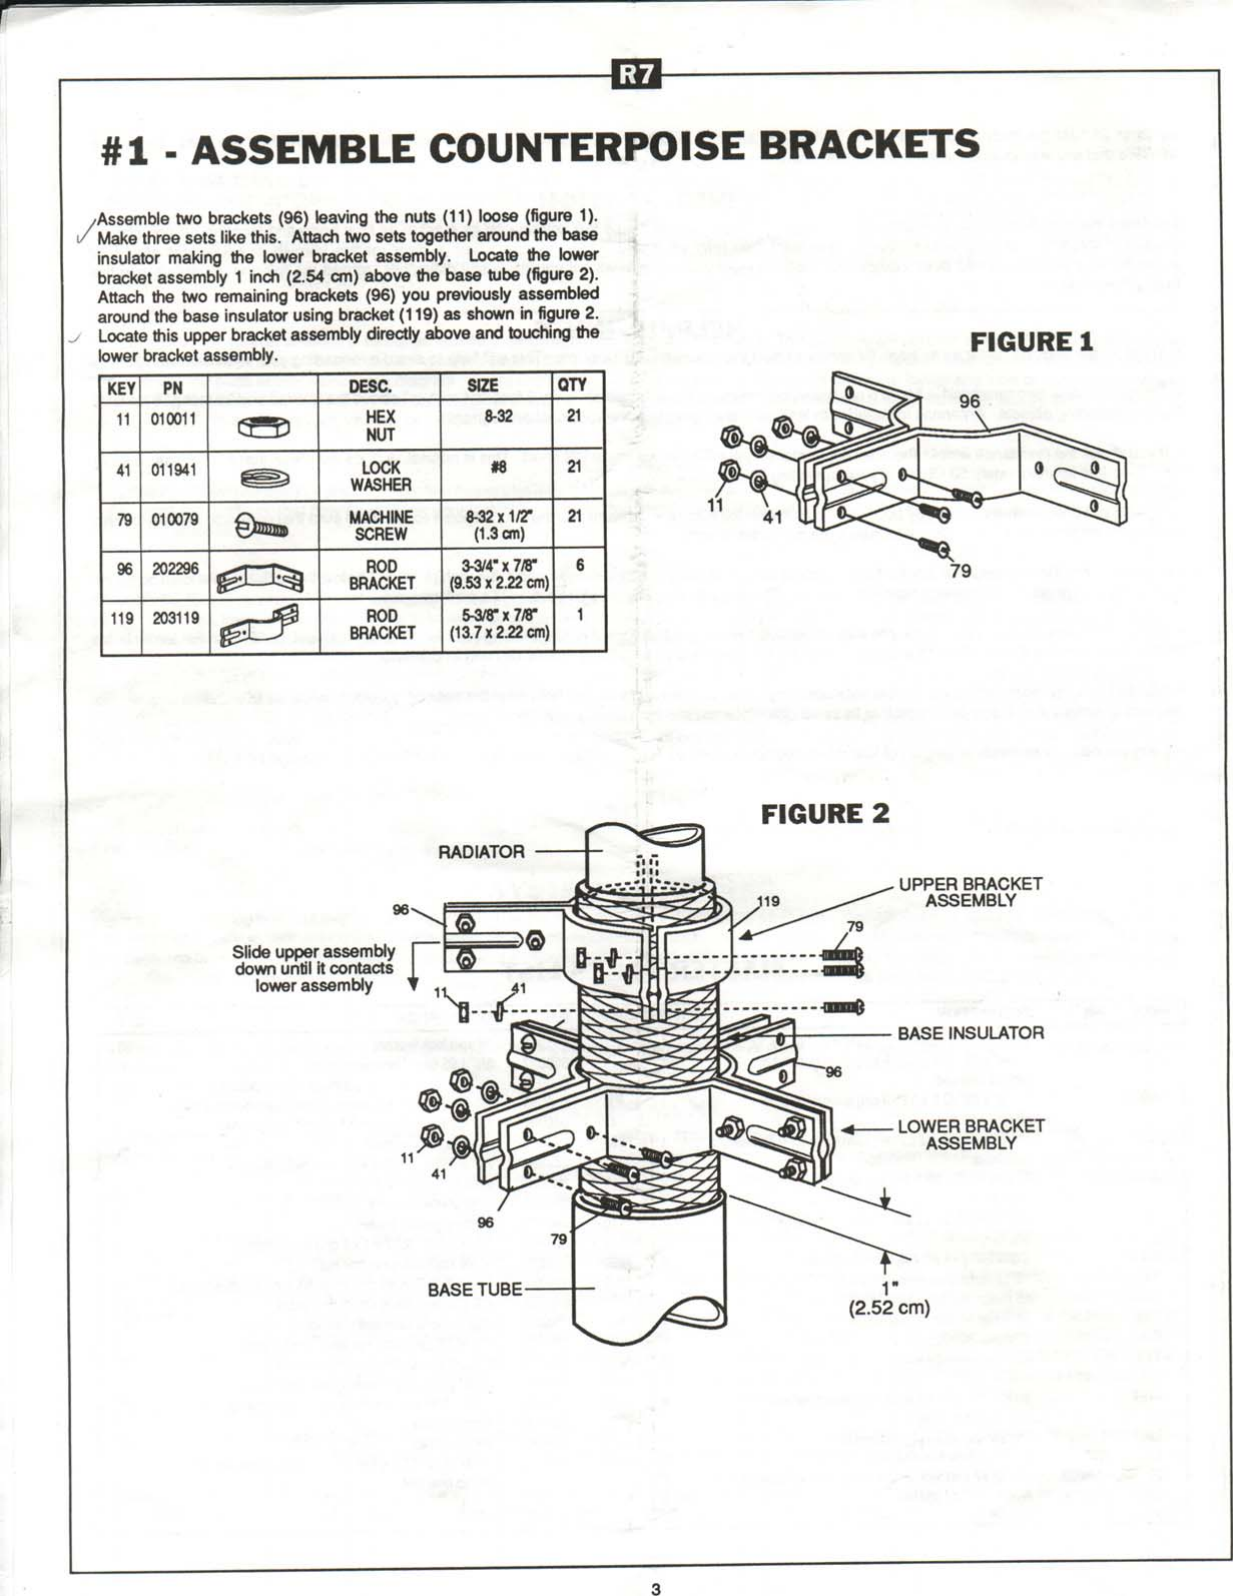 Page 4 of 8 - ACDSeeImprimer CUSHCRAFT--R7-User-manual